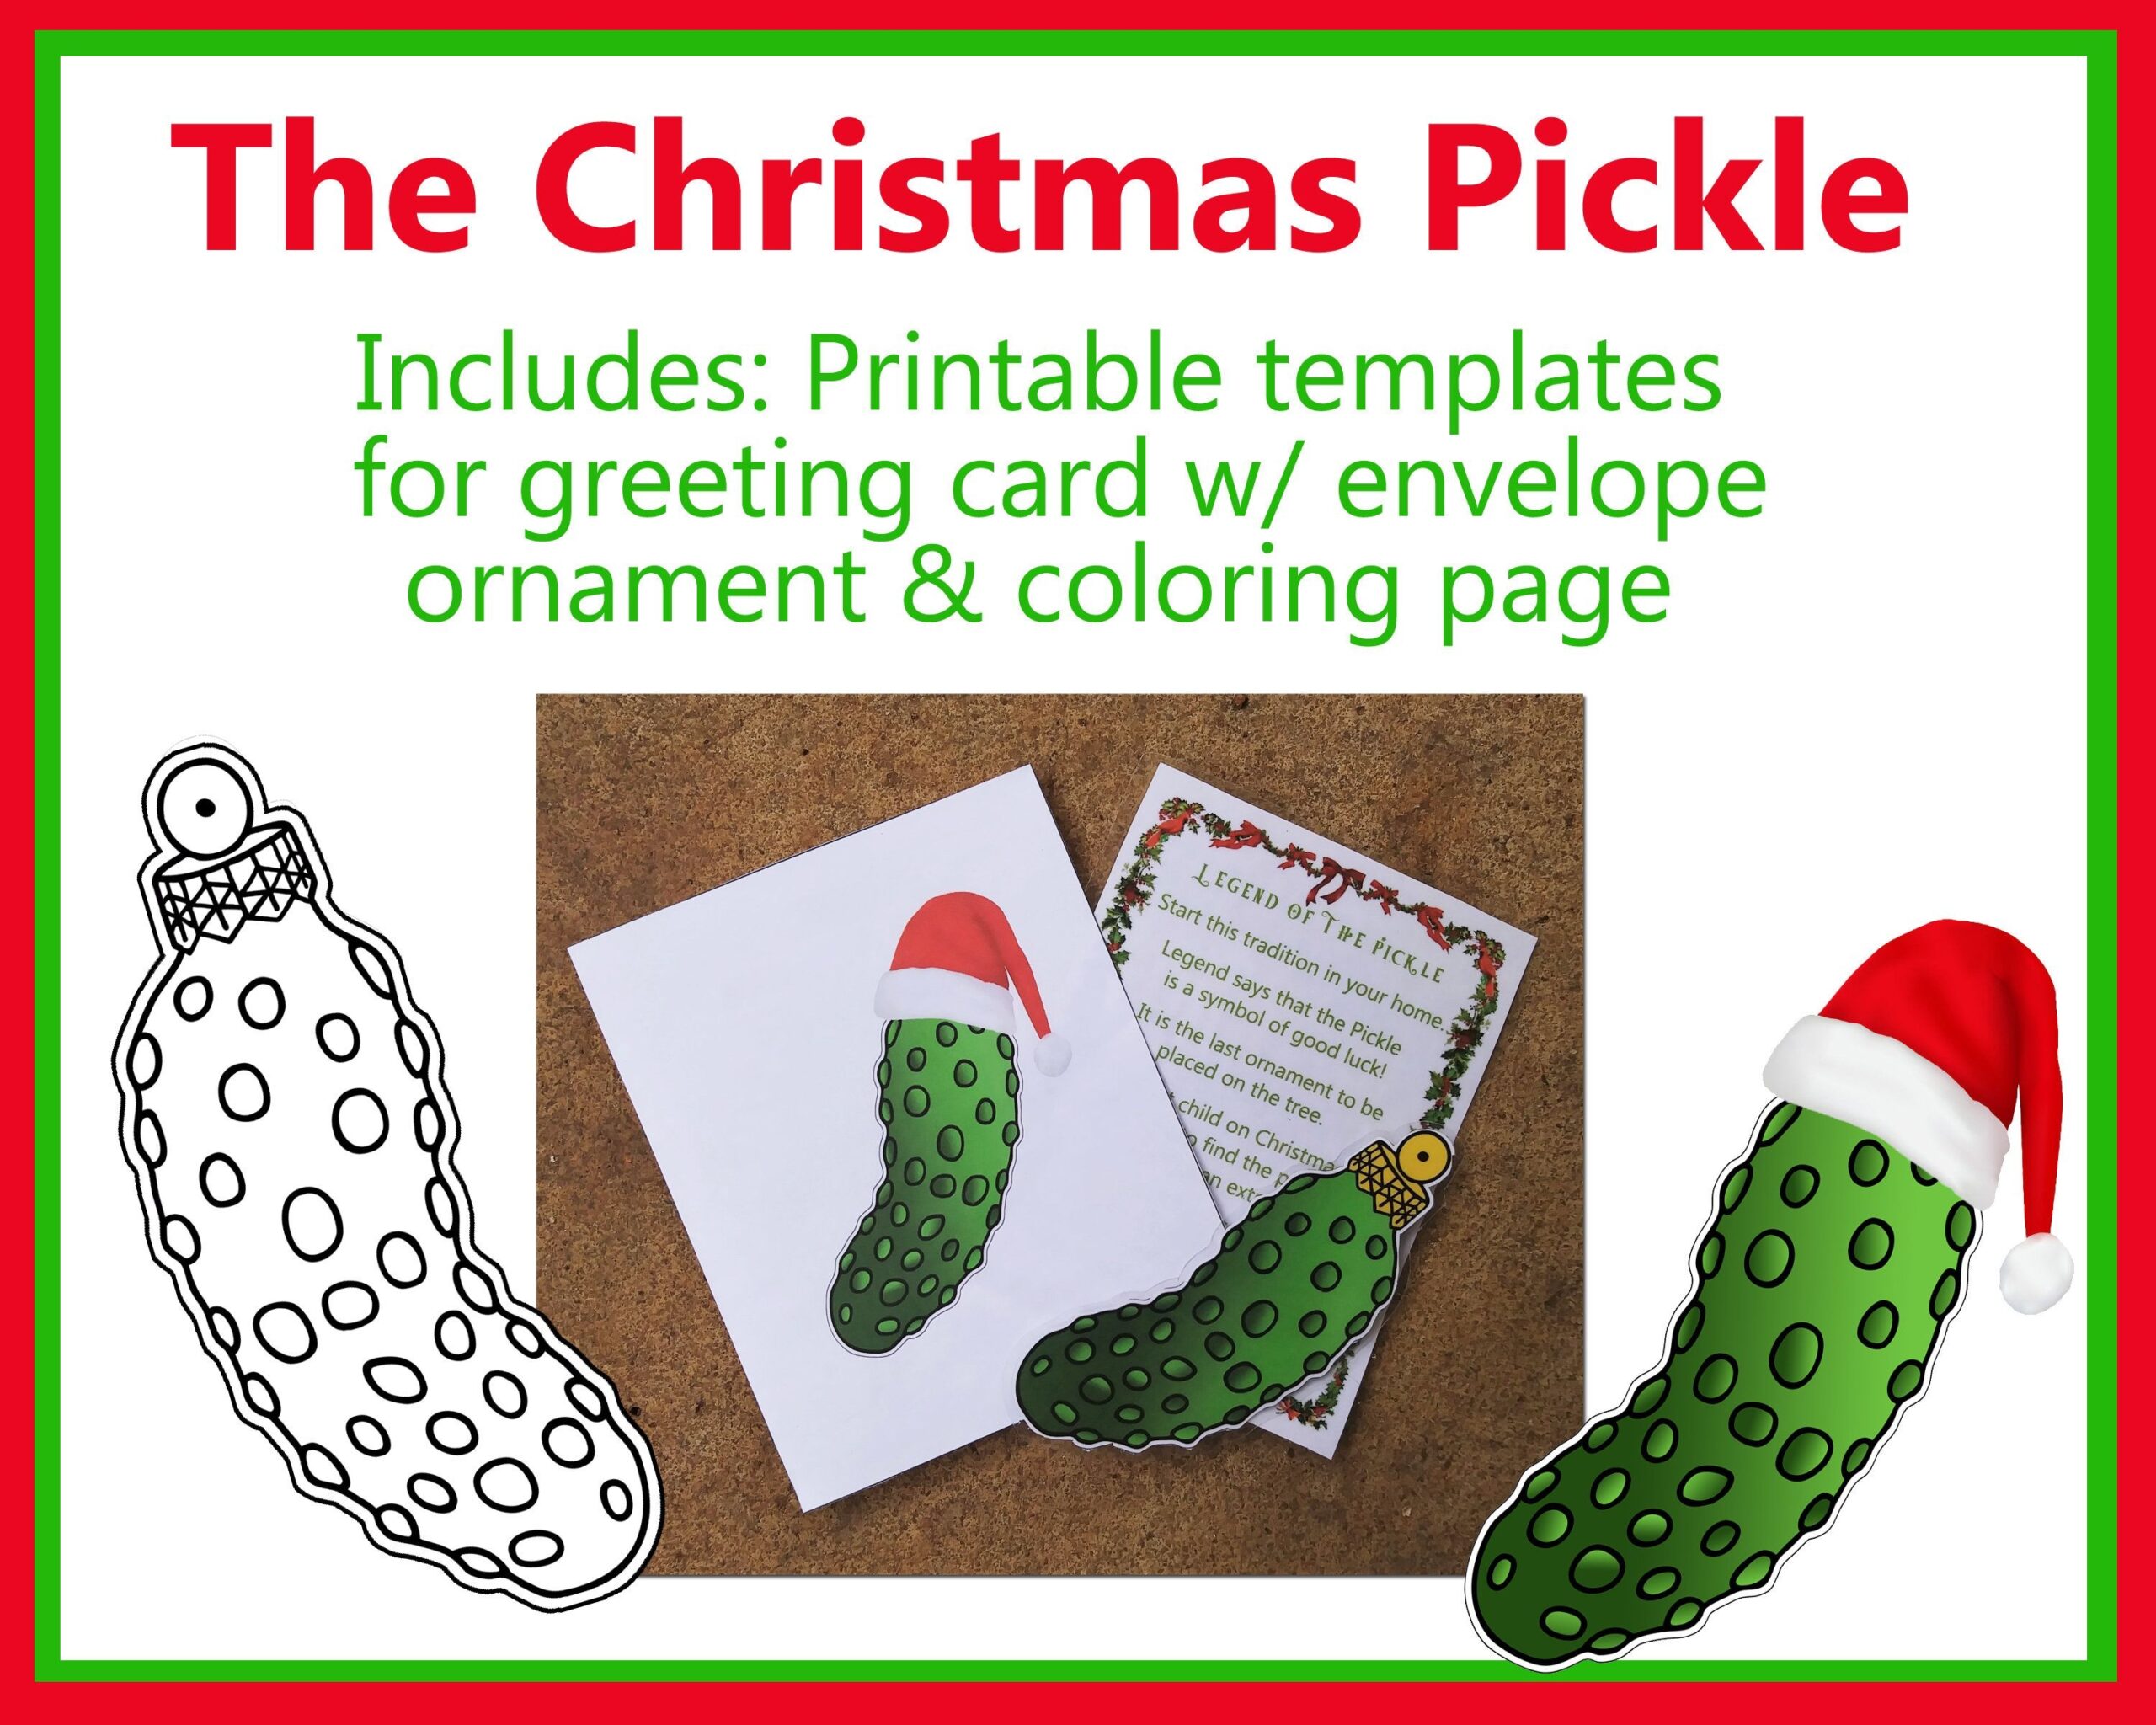 PRINTABLE The Christmas Pickle Legend Coloring Page Ornament And Greeting Card W Envelope Etsy Christmas Pickle Christmas Pickle Poem Free Christmas Printables